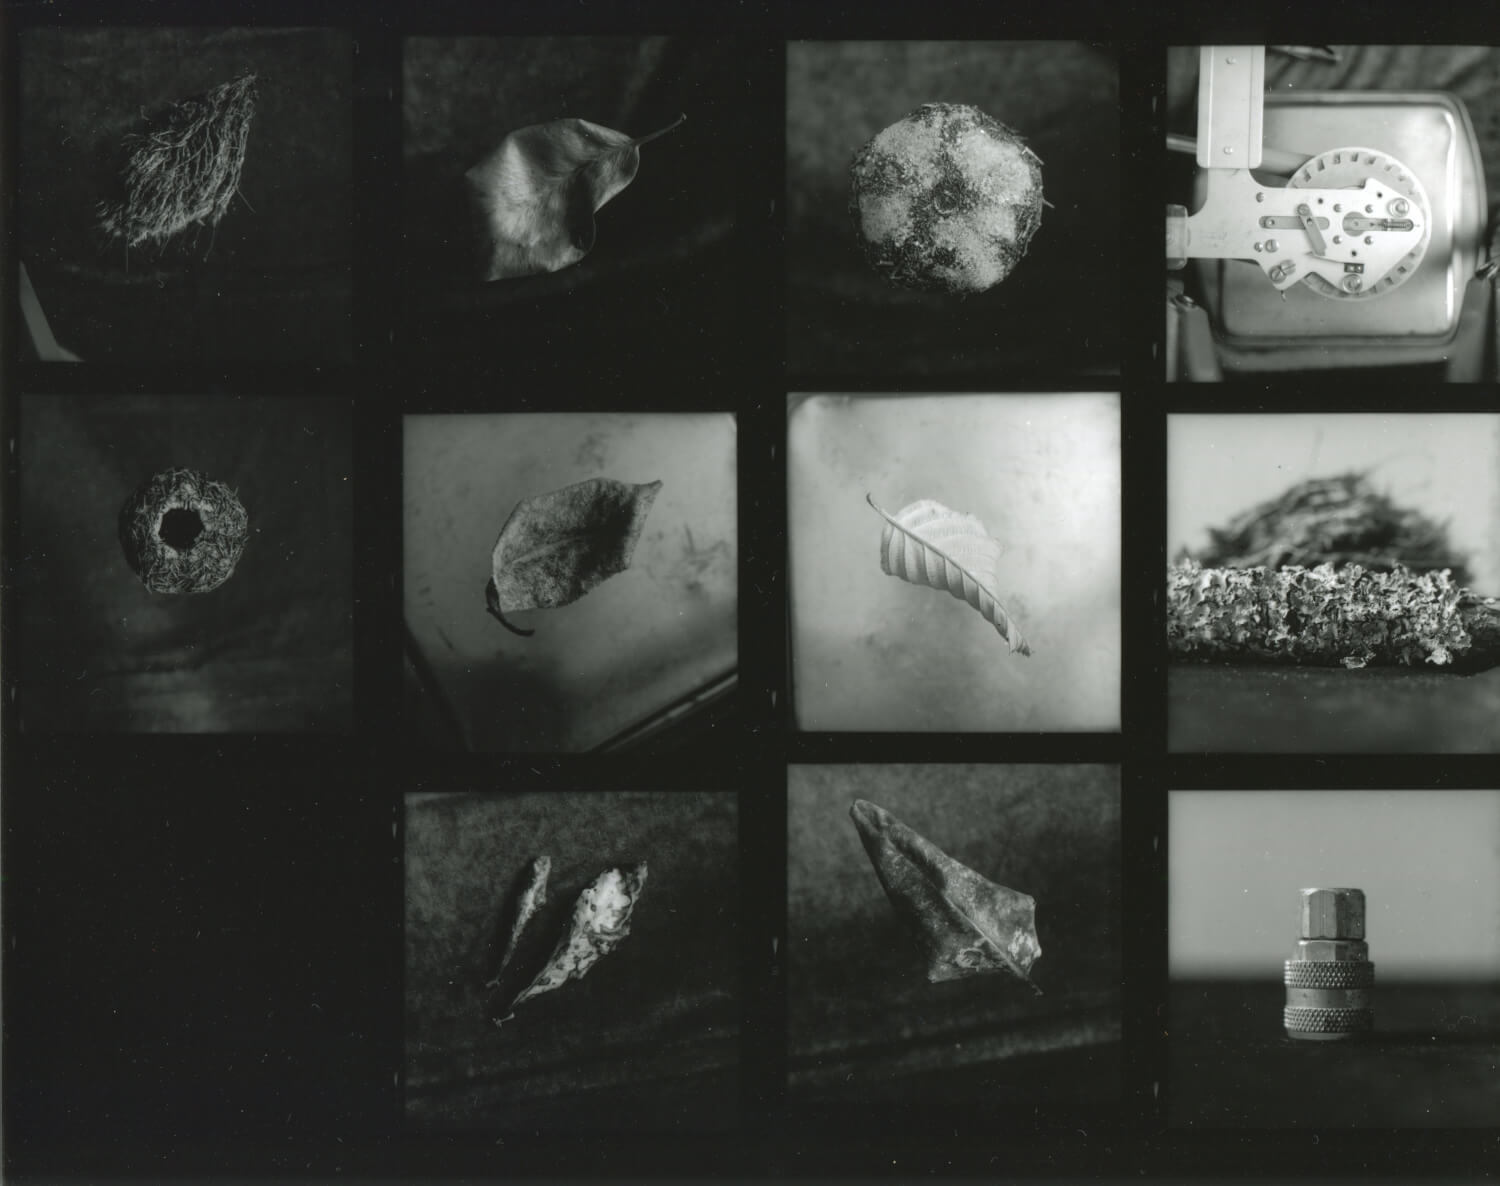 My quest to make art for the living room wall - Part 1 - Contact sheet 003